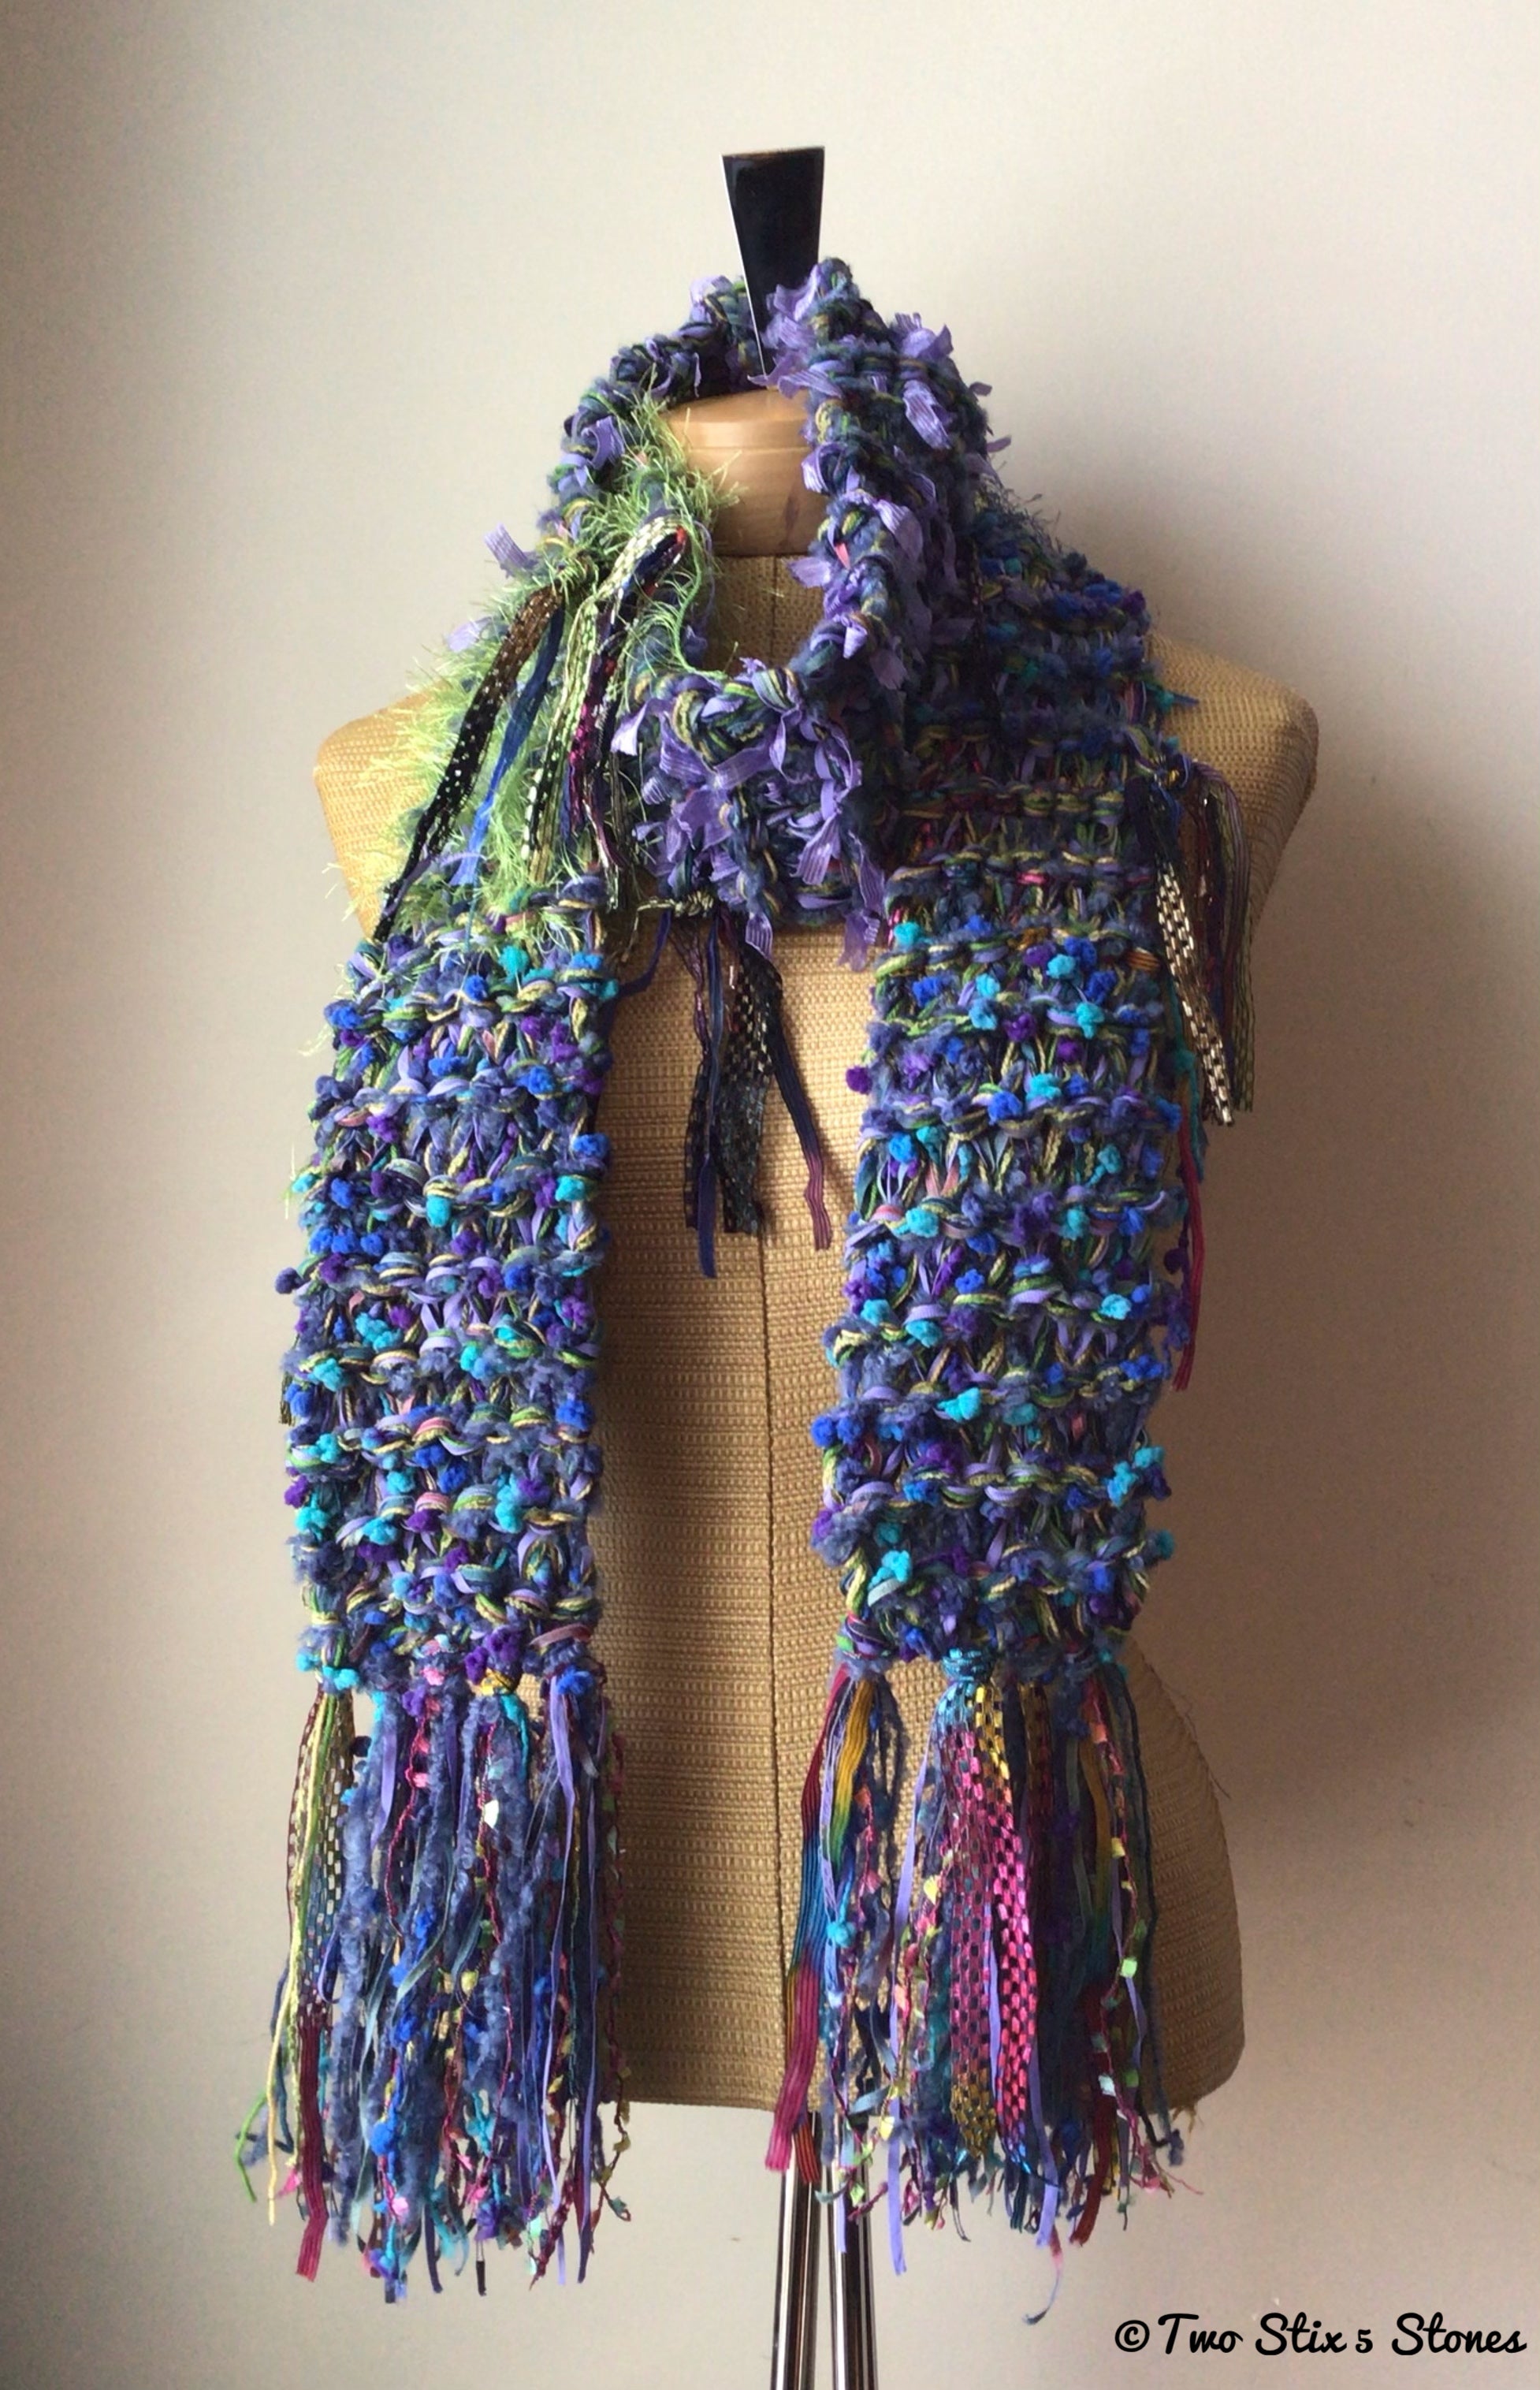 Luxe Lavender/Blue/Green Tweed Hand-Knit Scarf w/Fringe